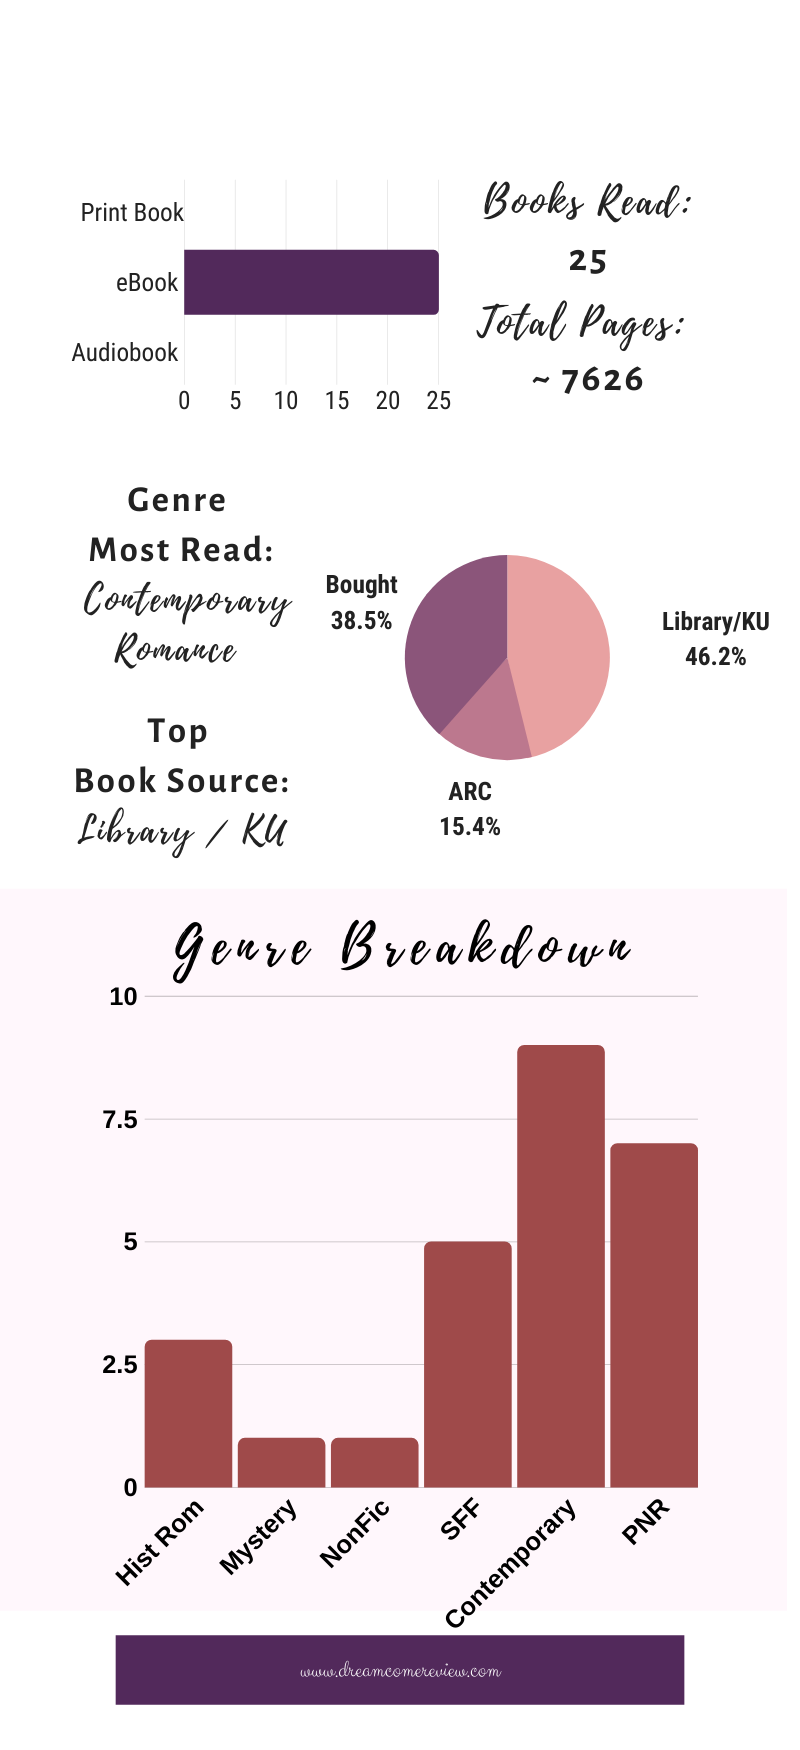 April Reading Habit Breakdown: Only ebooks read, 25 books read, approximately 7262 pages read, Most read genre contemporary romance, source used most library/ku